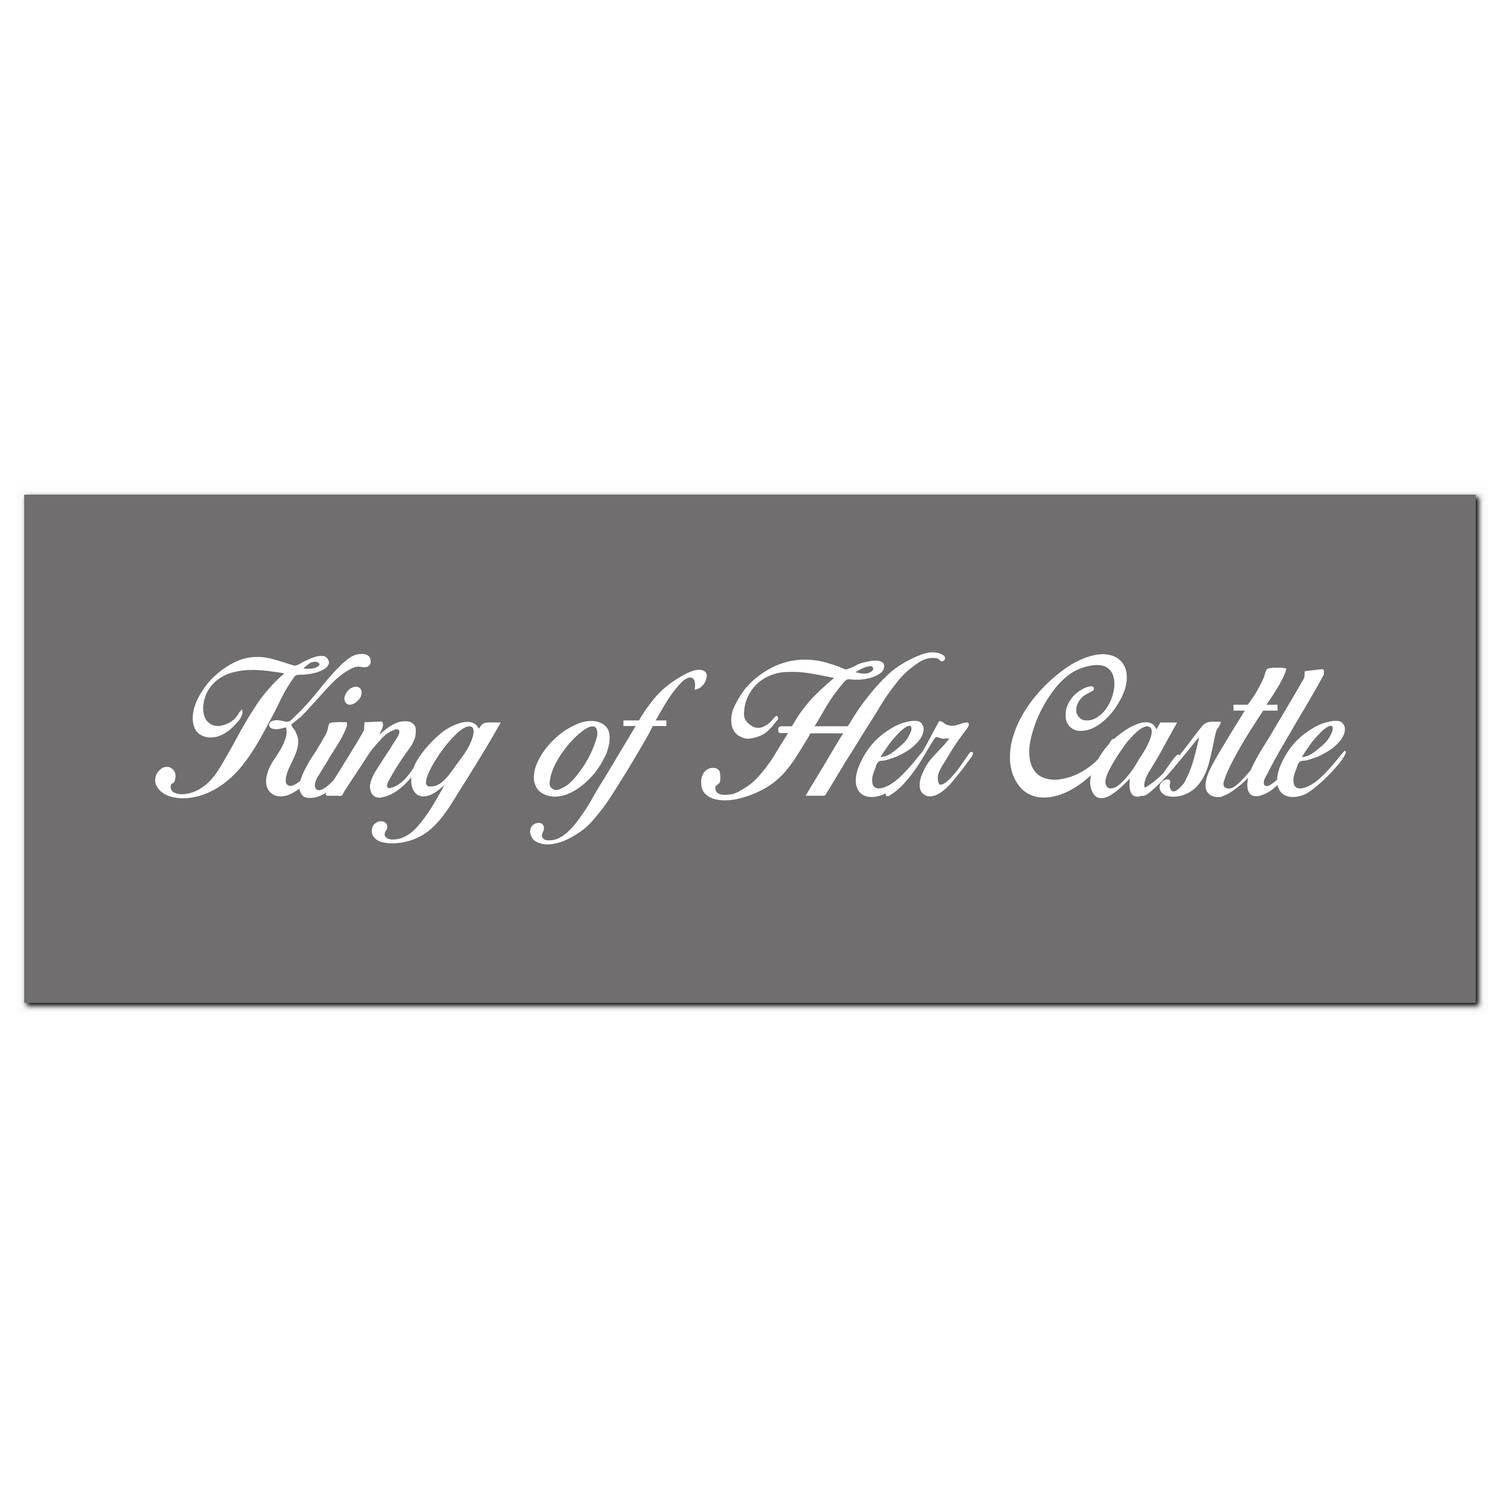 View King Of Her Castle Silver Foil Plaque information